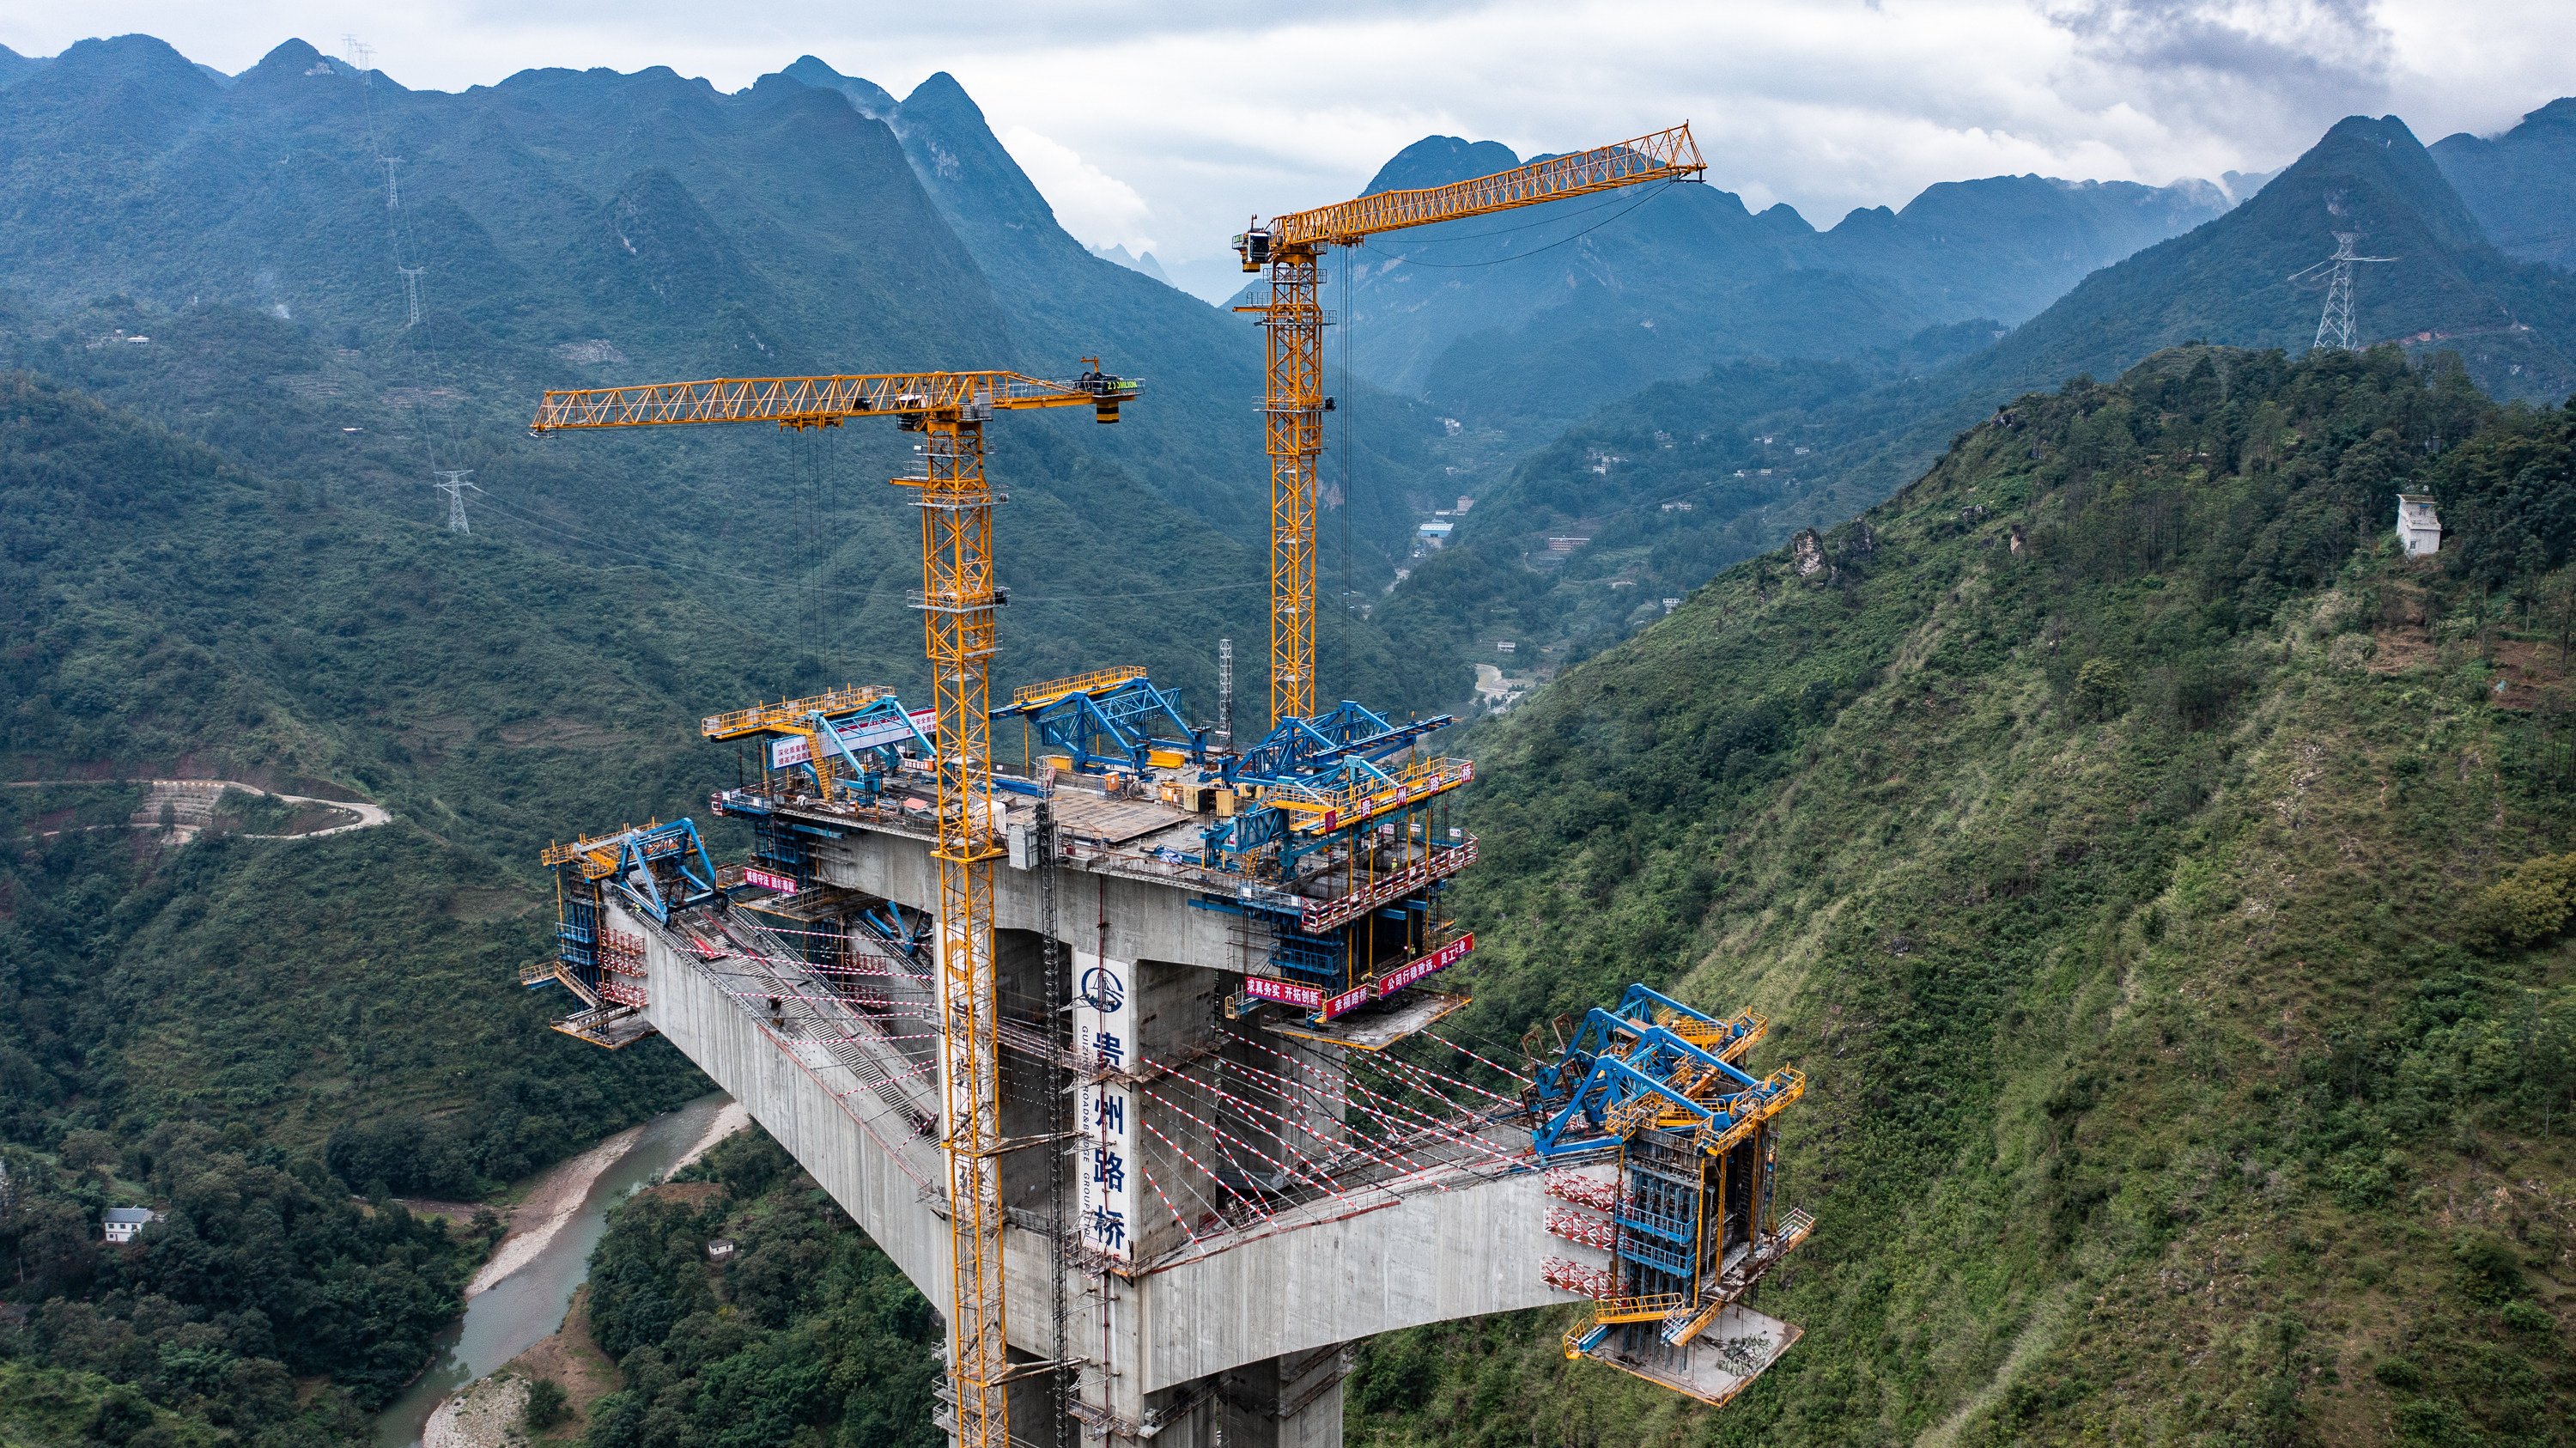 Sprawling bridges, like this one being built in China’s Guizhou province, can raise debt levels among local governments. Photo: Xinhua